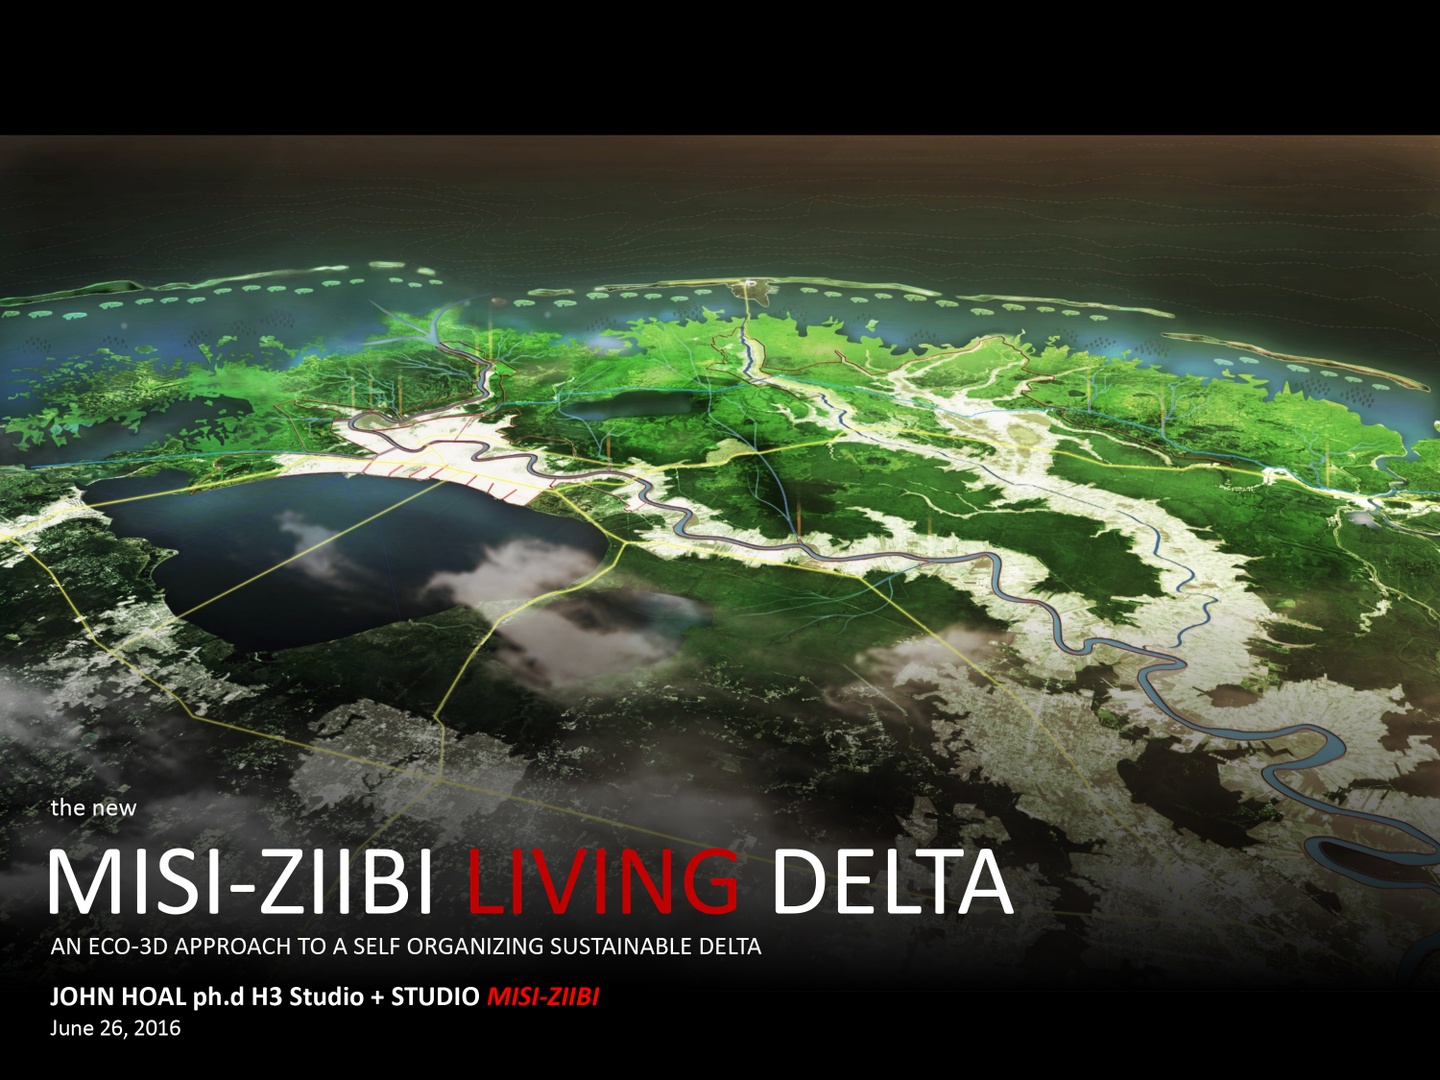 Rendering of a satellite view of a river, labeled "The New Misi-Ziibi Living Delta."